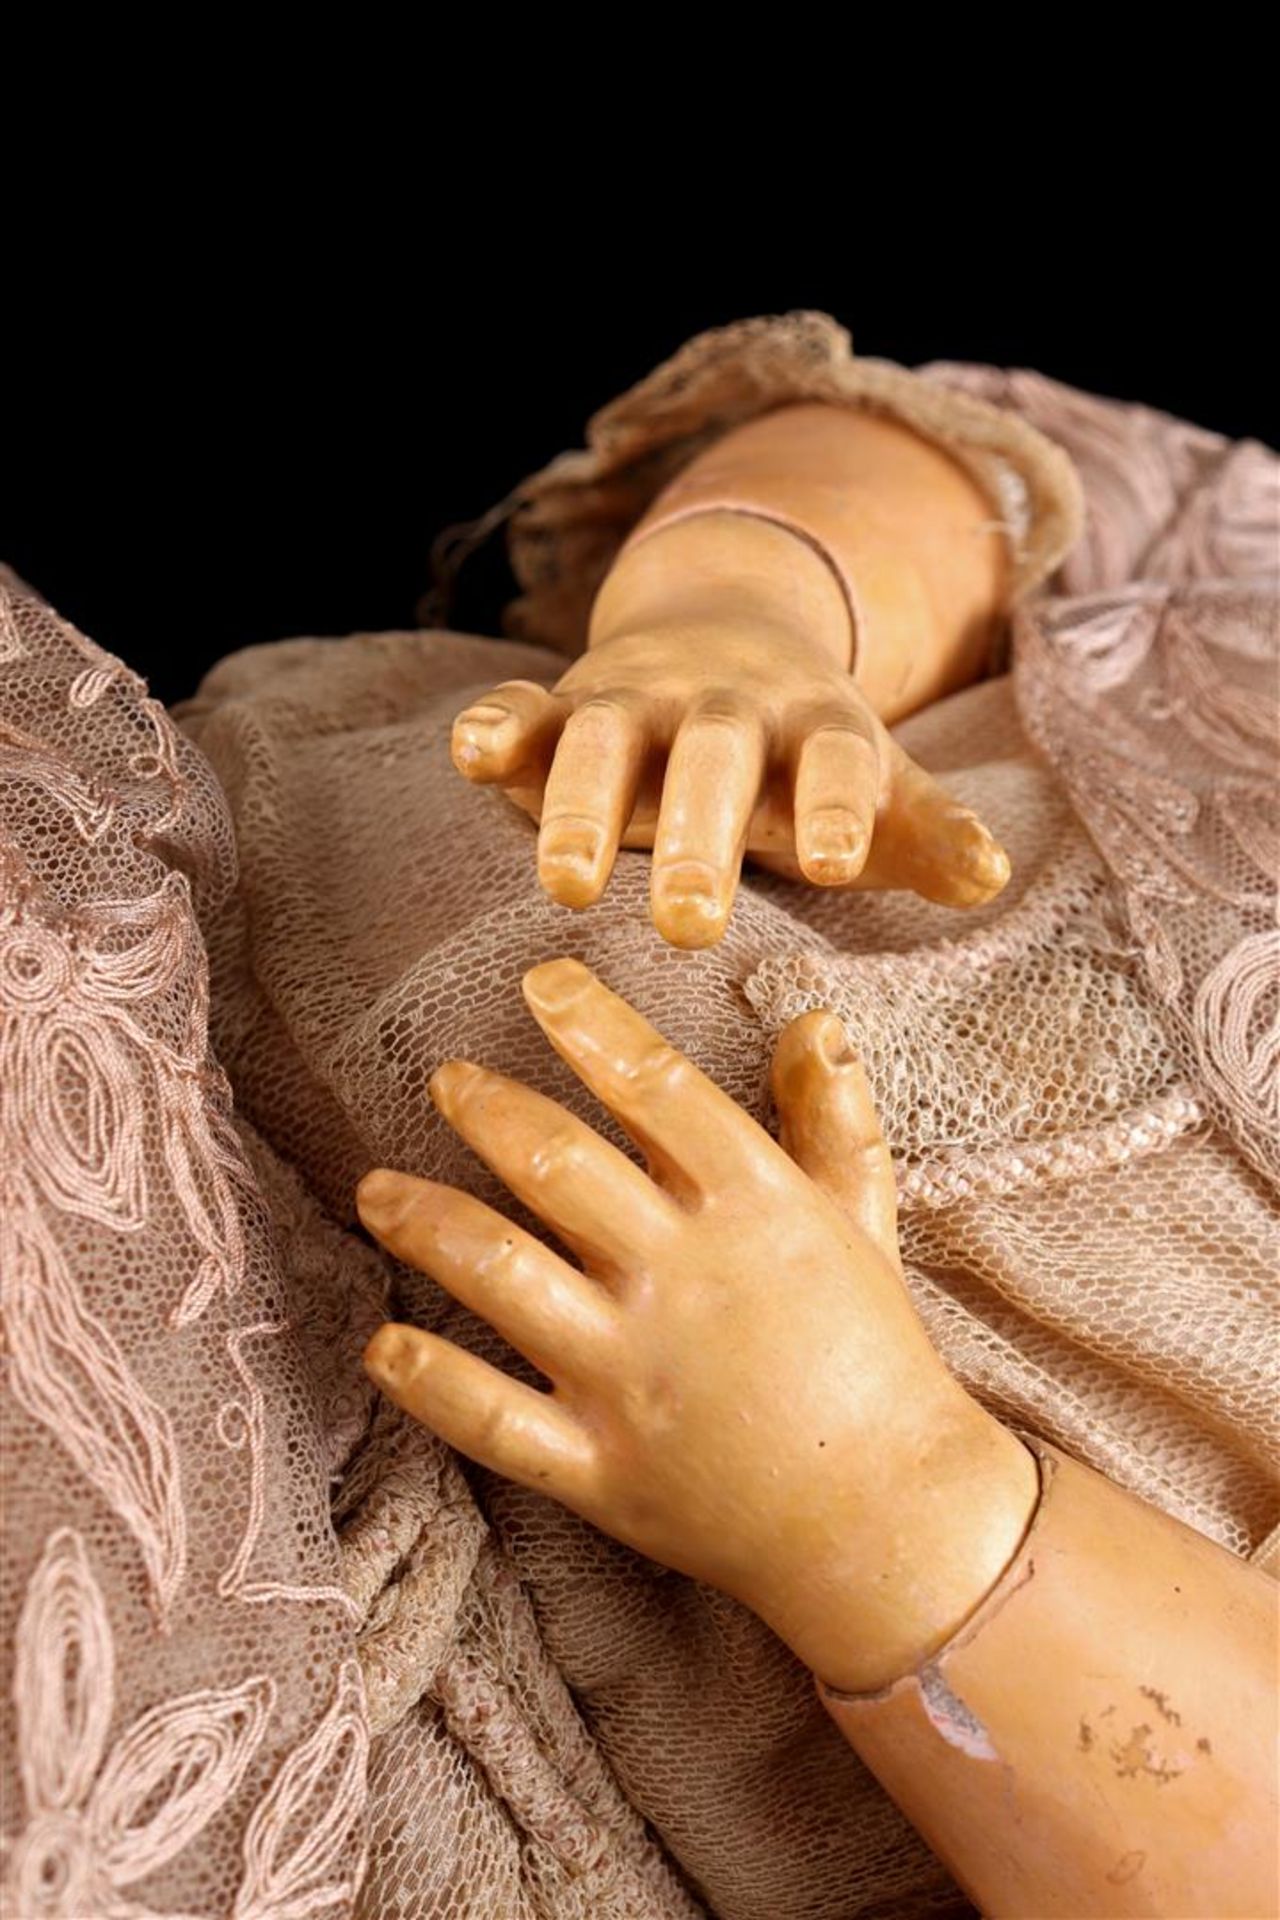 Jumeau doll with closed mouth - Image 6 of 6